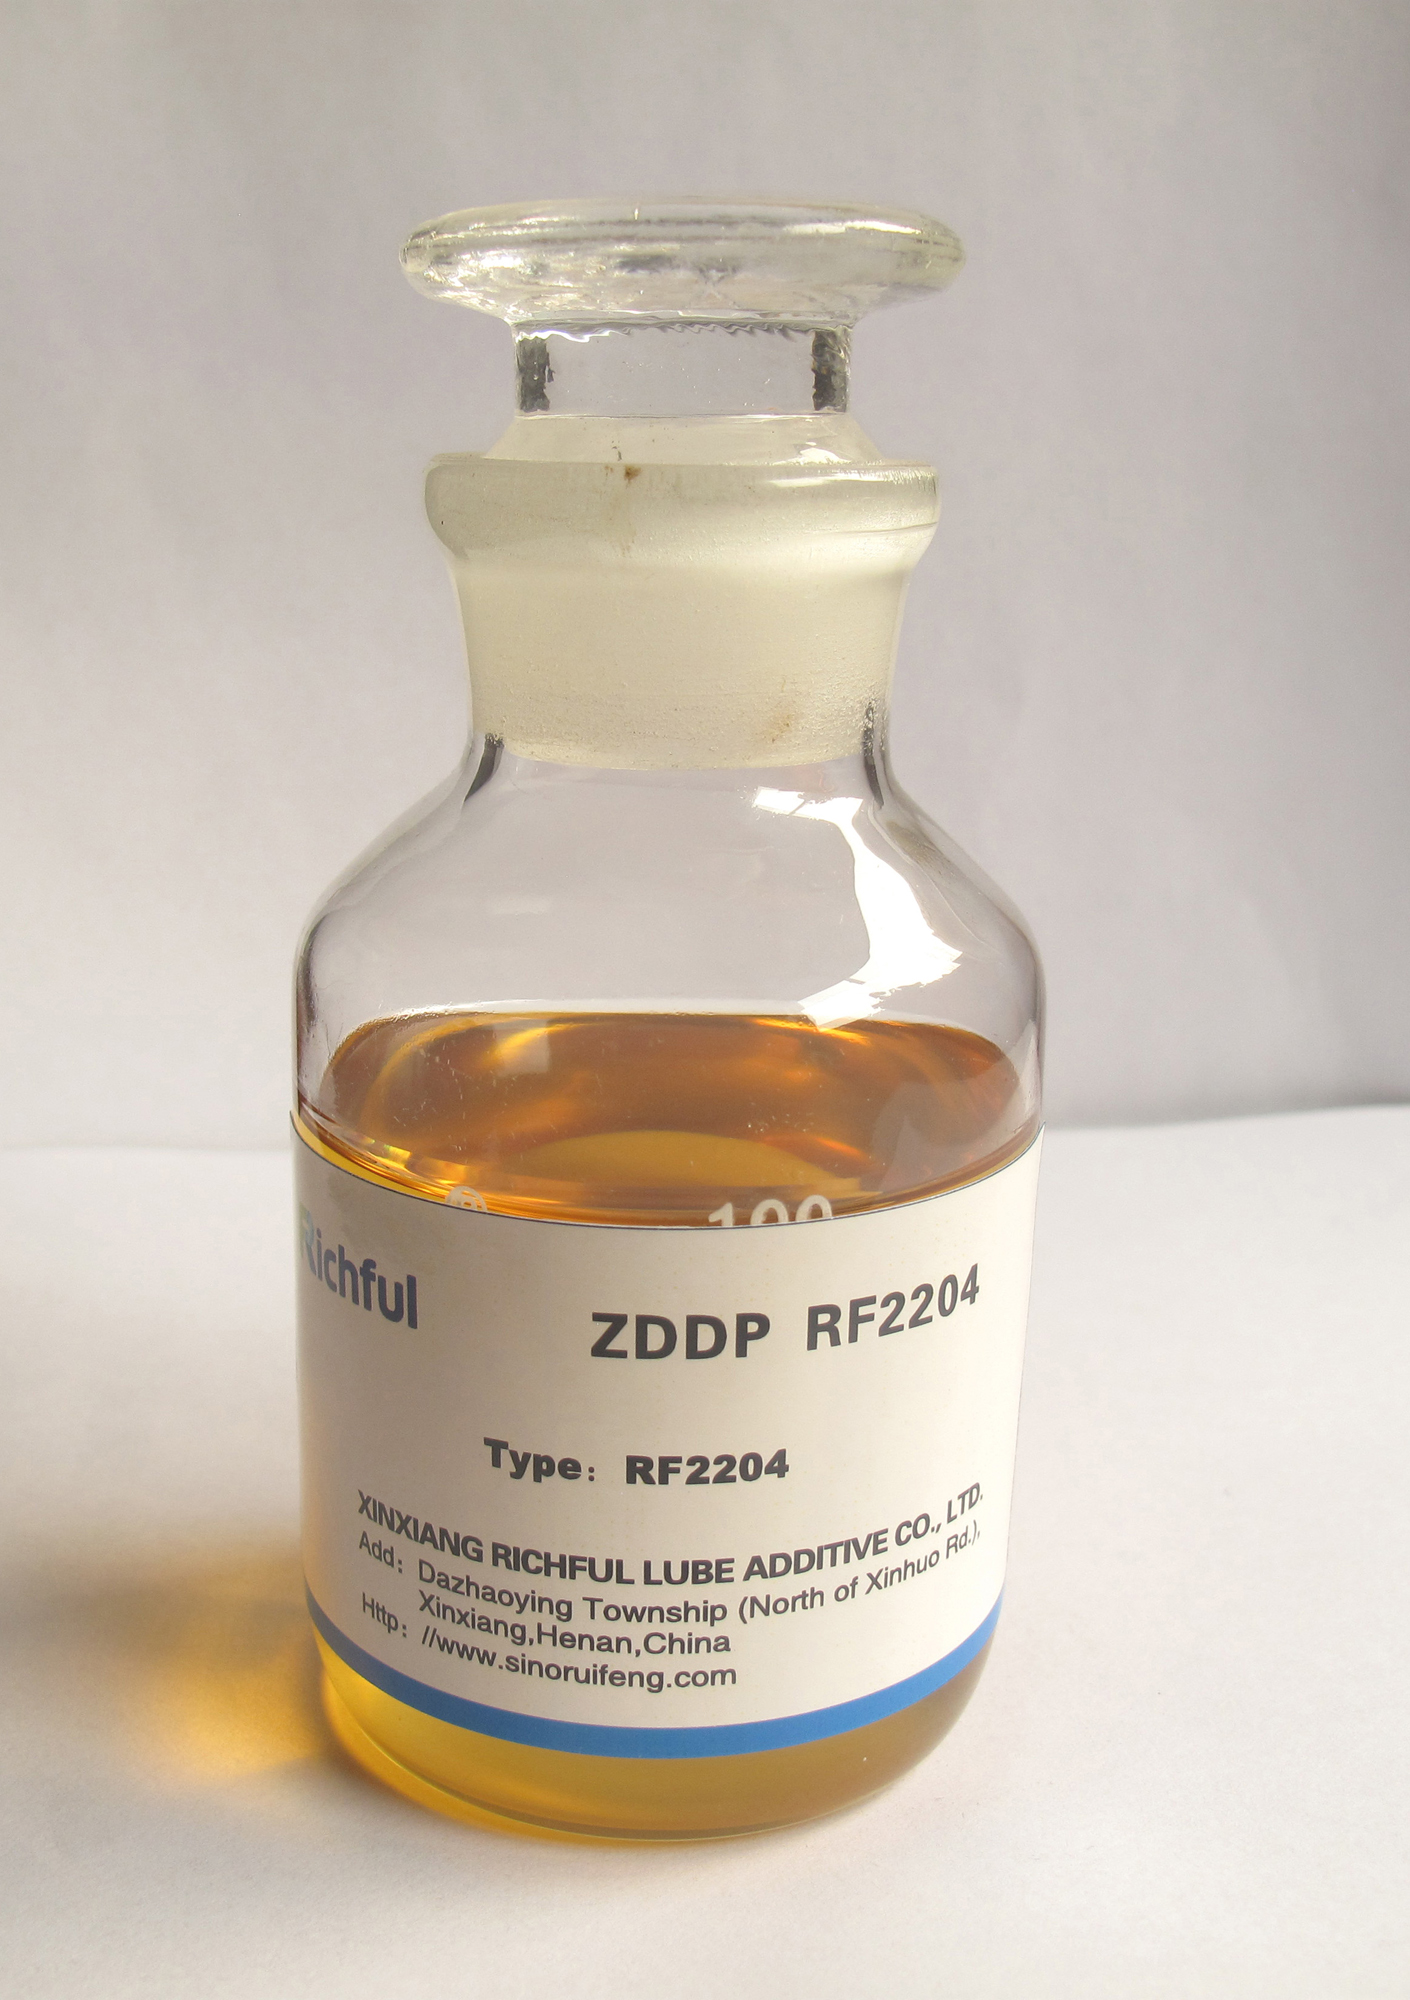 ZDDP Richful Lubricant Additives Antioxidant and Corrosion Inhibitor ZDDP   Zinc Primary-Secondary Alkyl Dithiophosphate  RF2204